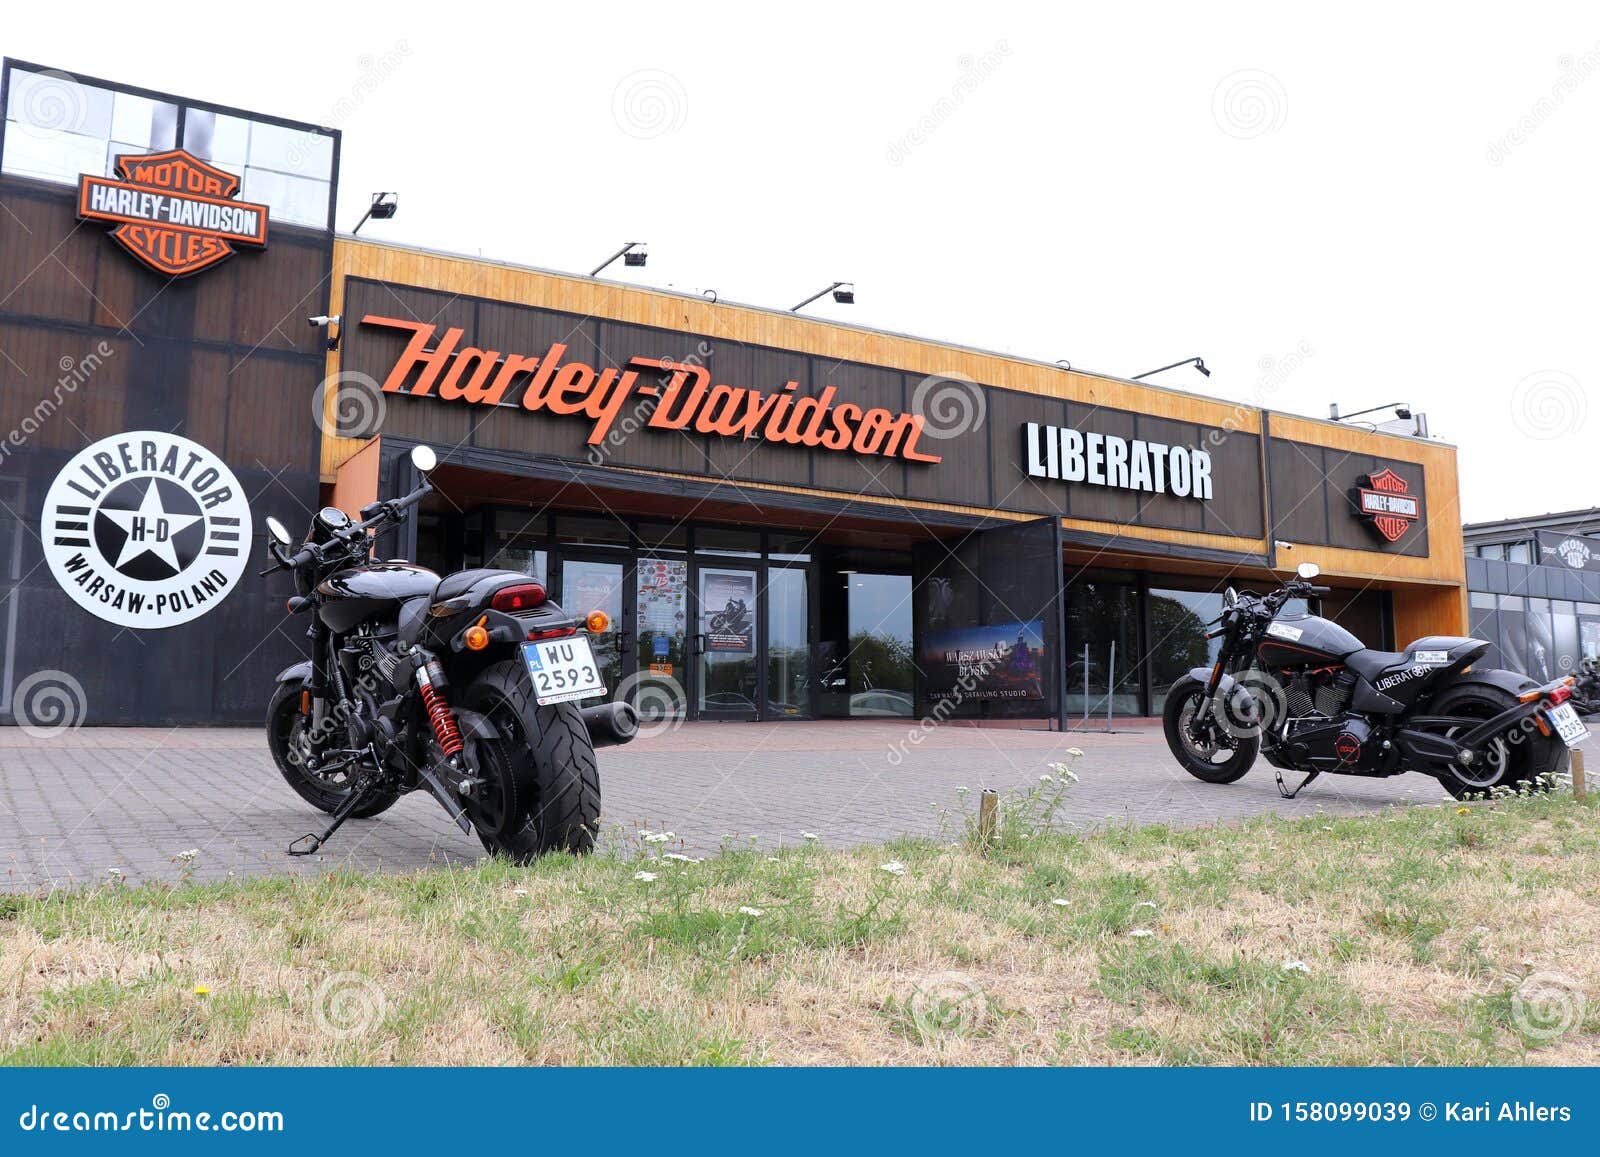 Motorcycles Parked In Front Of A Harley Davidson Store In Warsaw Poland Editorial Stock Image Image Of Destination Place 158099039